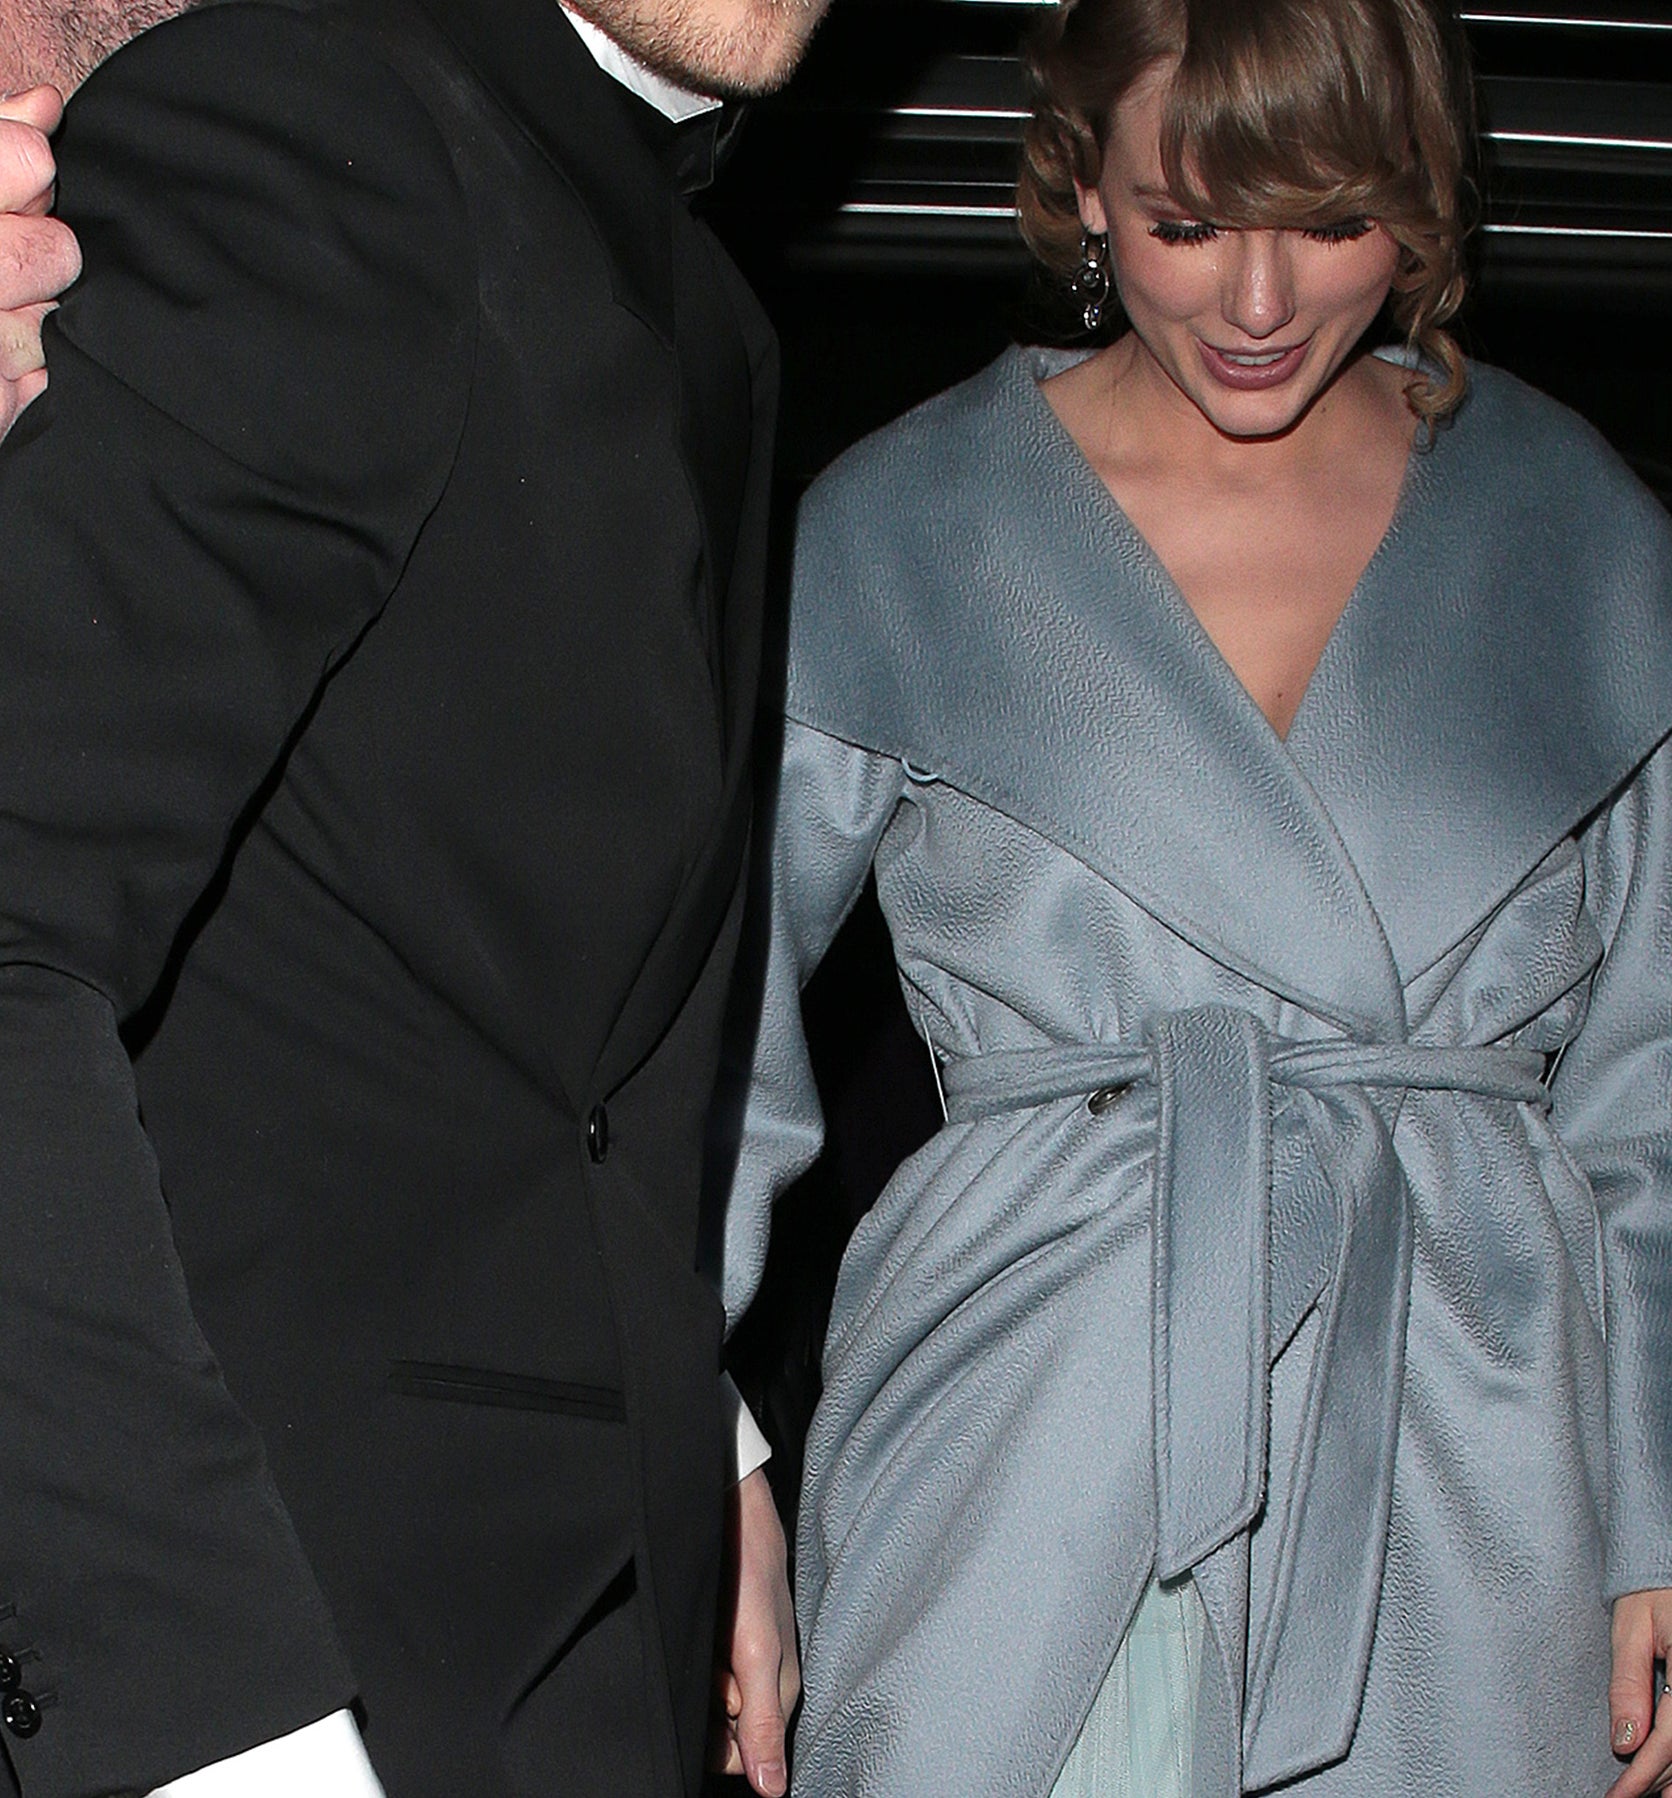 Joe Alwyn in a suit and Taylor Swift in a long coat are seen walking together, guided by an assistant holding an umbrella